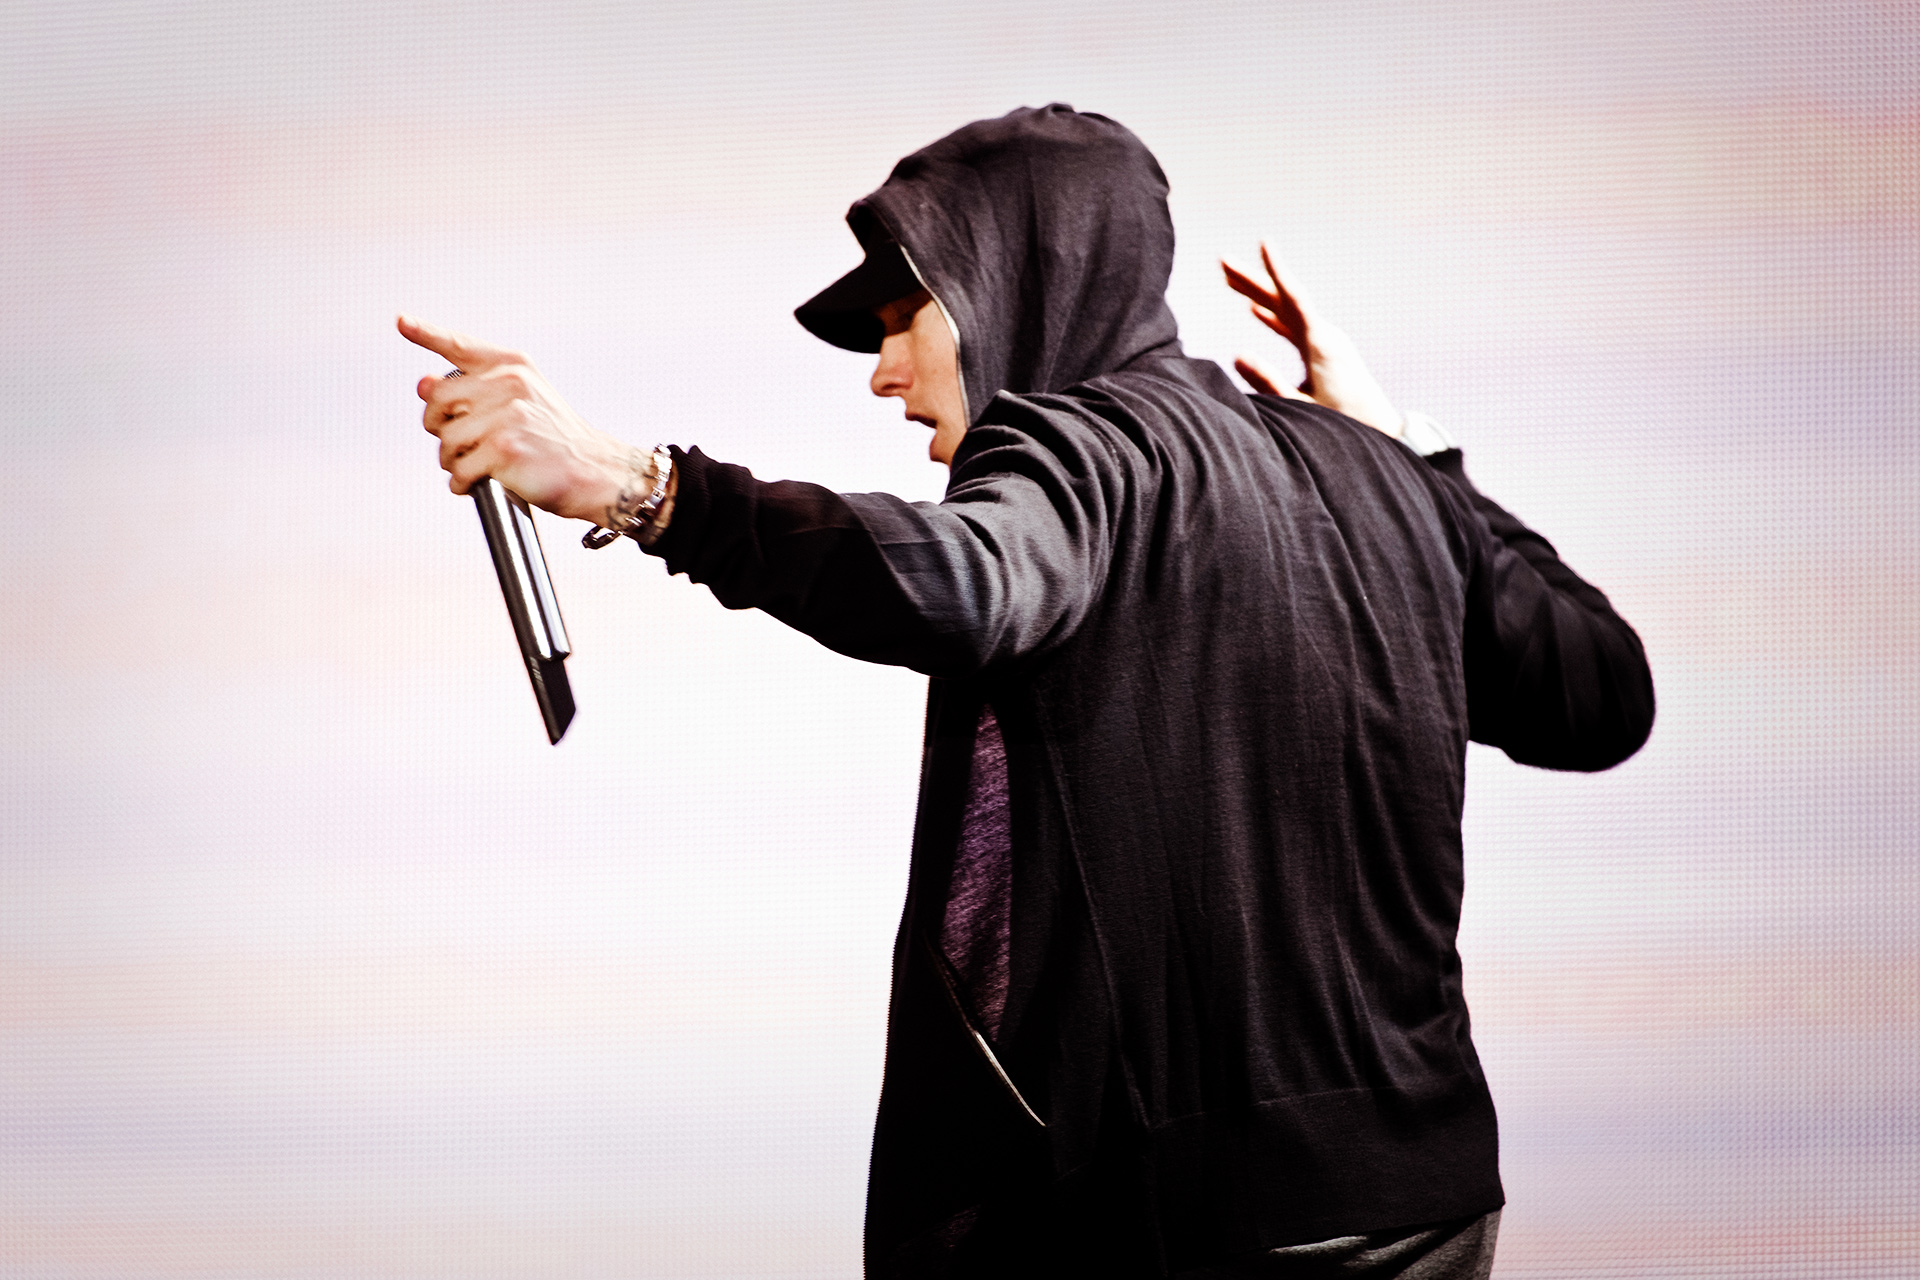 Eminem - Recovery (2010) - Hip Hop Wallpapers